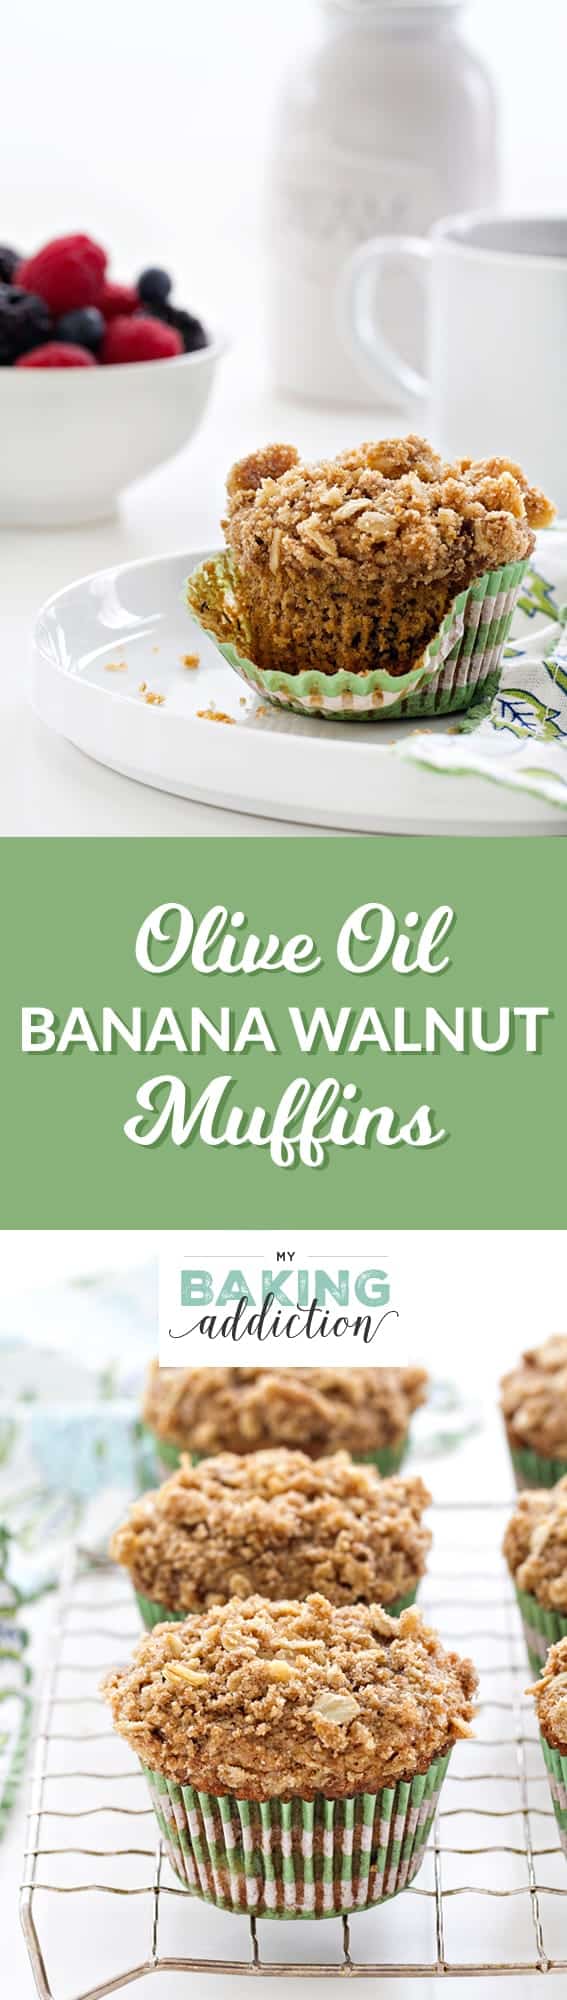 Olive Oil Banana Walnut Muffins are a light and sweet start to any day. Walnuts pack a punch of protein that'll keep you going all morning. 